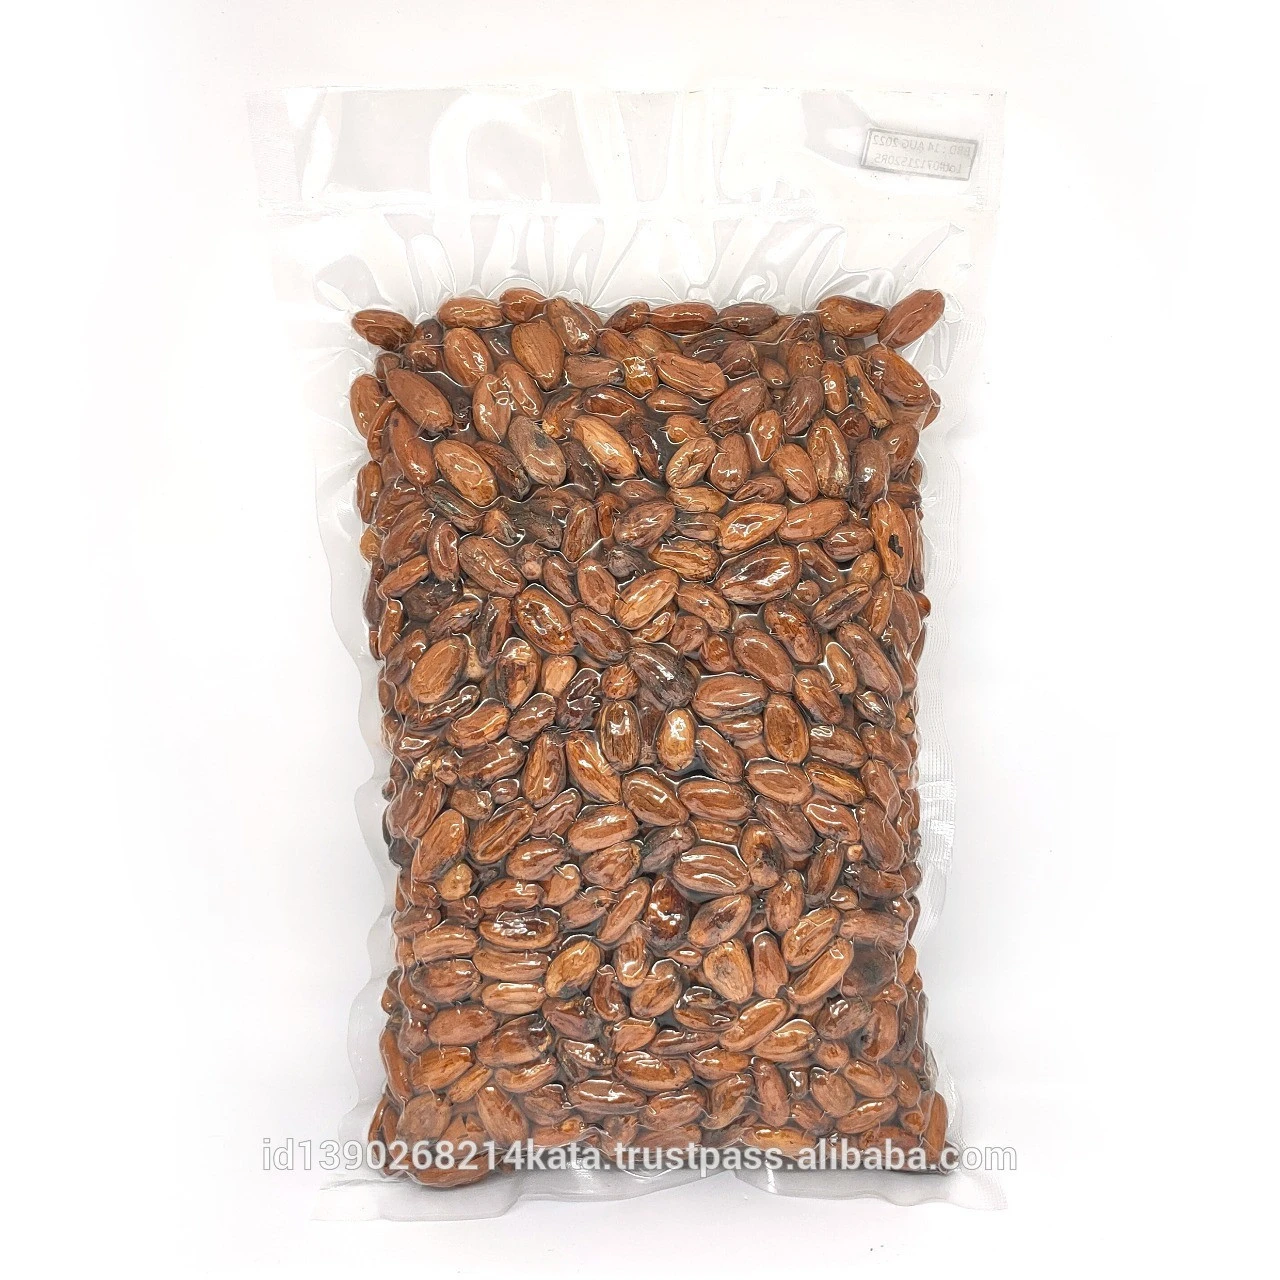 RAW CACAO BEANS